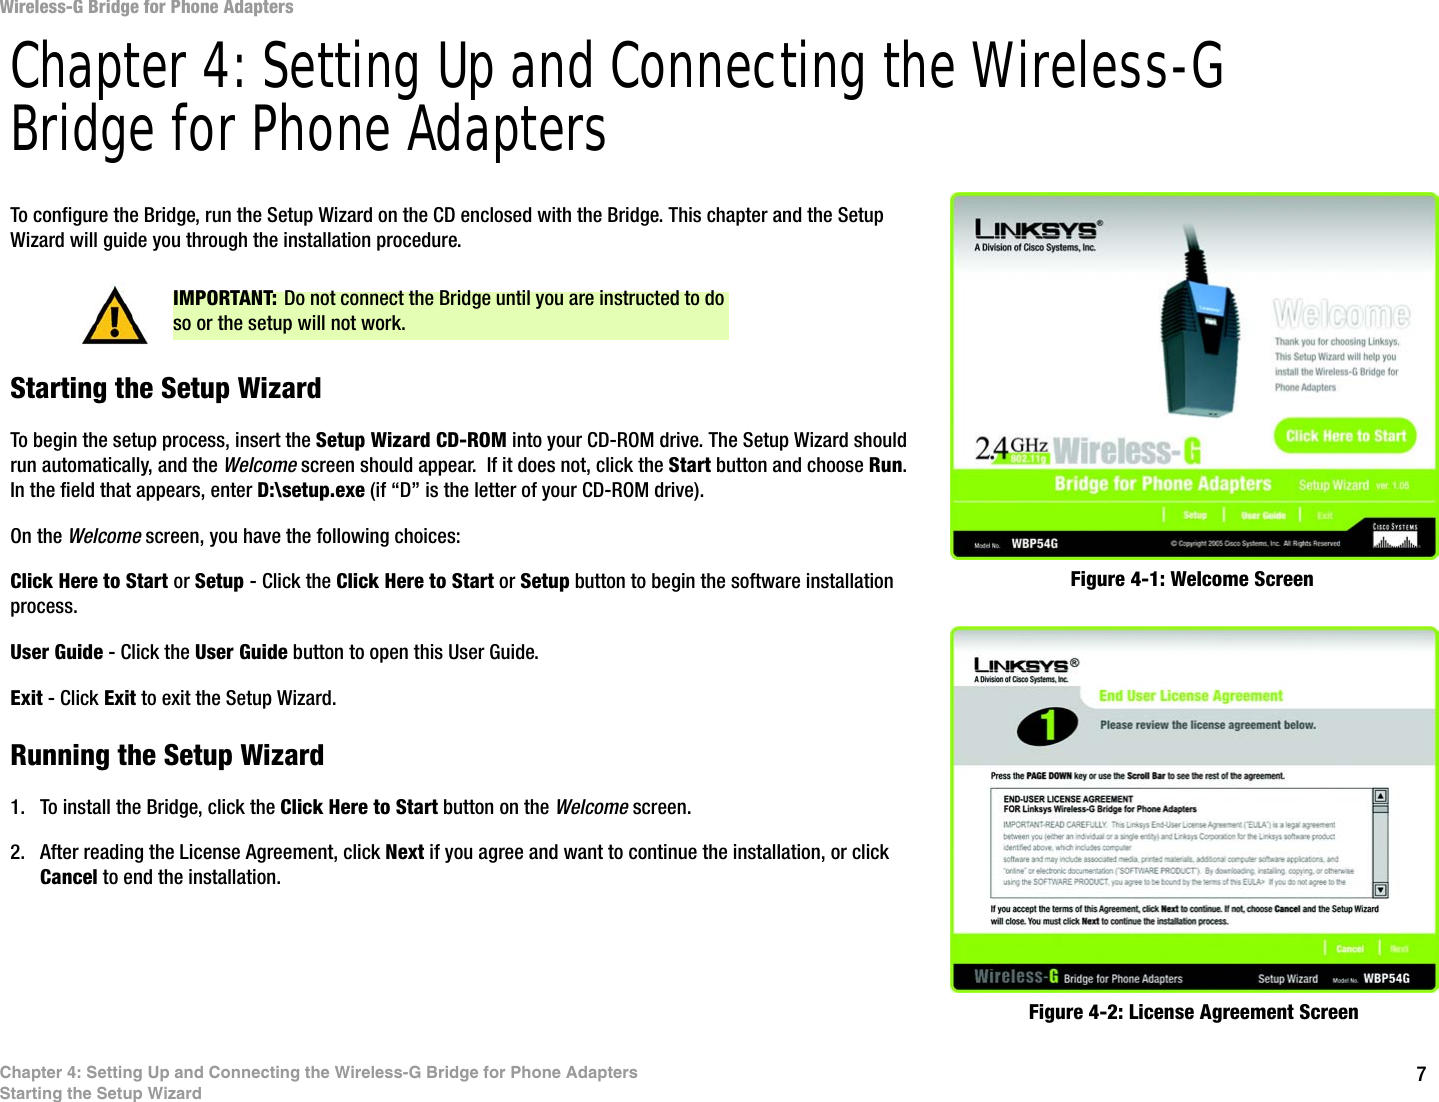 7Chapter 4: Setting Up and Connecting the Wireless-G Bridge for Phone AdaptersStarting the Setup WizardWireless-G Bridge for Phone AdaptersChapter 4: Setting Up and Connecting the Wireless-G Bridge for Phone AdaptersTo configure the Bridge, run the Setup Wizard on the CD enclosed with the Bridge. This chapter and the Setup Wizard will guide you through the installation procedure.Starting the Setup WizardTo begin the setup process, insert the Setup Wizard CD-ROM into your CD-ROM drive. The Setup Wizard should run automatically, and the Welcome screen should appear.  If it does not, click the Start button and choose Run. In the field that appears, enter D:\setup.exe (if “D” is the letter of your CD-ROM drive). On the Welcome screen, you have the following choices:Click Here to Start or Setup - Click the Click Here to Start or Setup button to begin the software installation process. User Guide - Click the User Guide button to open this User Guide. Exit - Click Exit to exit the Setup Wizard.Running the Setup Wizard1. To install the Bridge, click the Click Here to Start button on the Welcome screen.2. After reading the License Agreement, click Next if you agree and want to continue the installation, or click Cancel to end the installation.Figure 4-1: Welcome ScreenFigure 4-2: License Agreement ScreenIMPORTANT: Do not connect the Bridge until you are instructed to do so or the setup will not work.